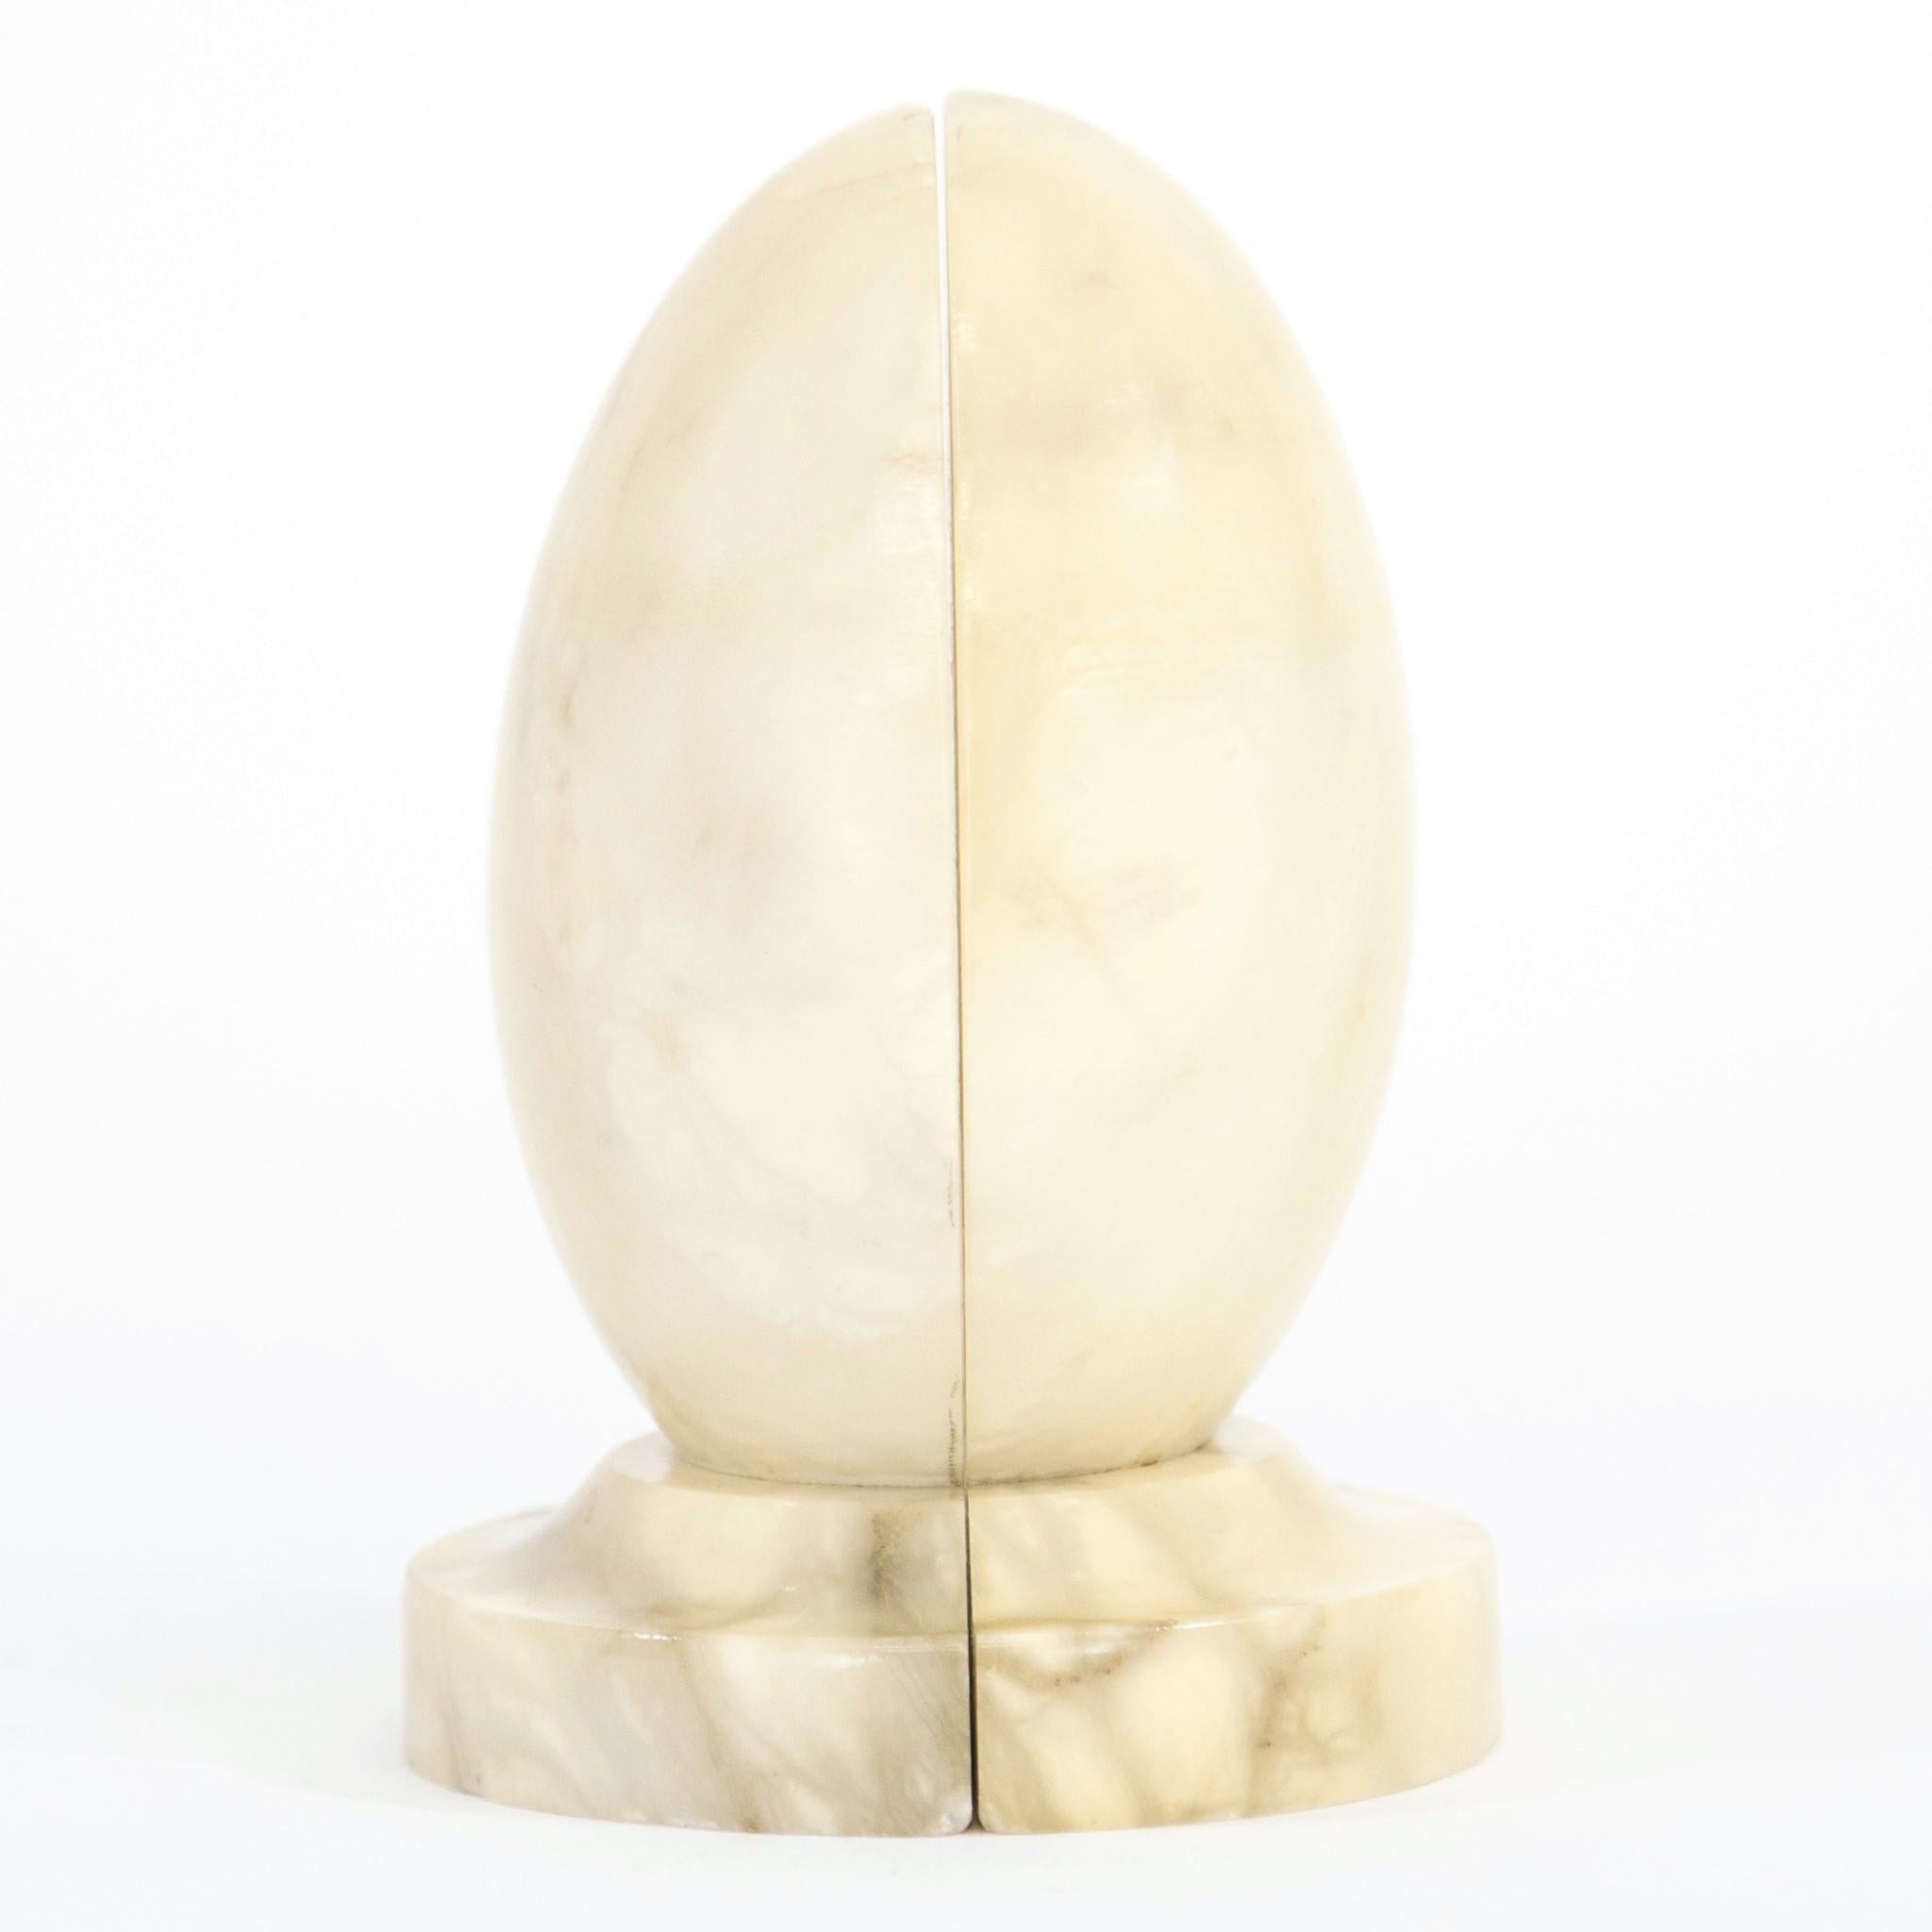 Pair of Mid-Century Italian Alabaster Off-White Egg-Shape Bookends 3